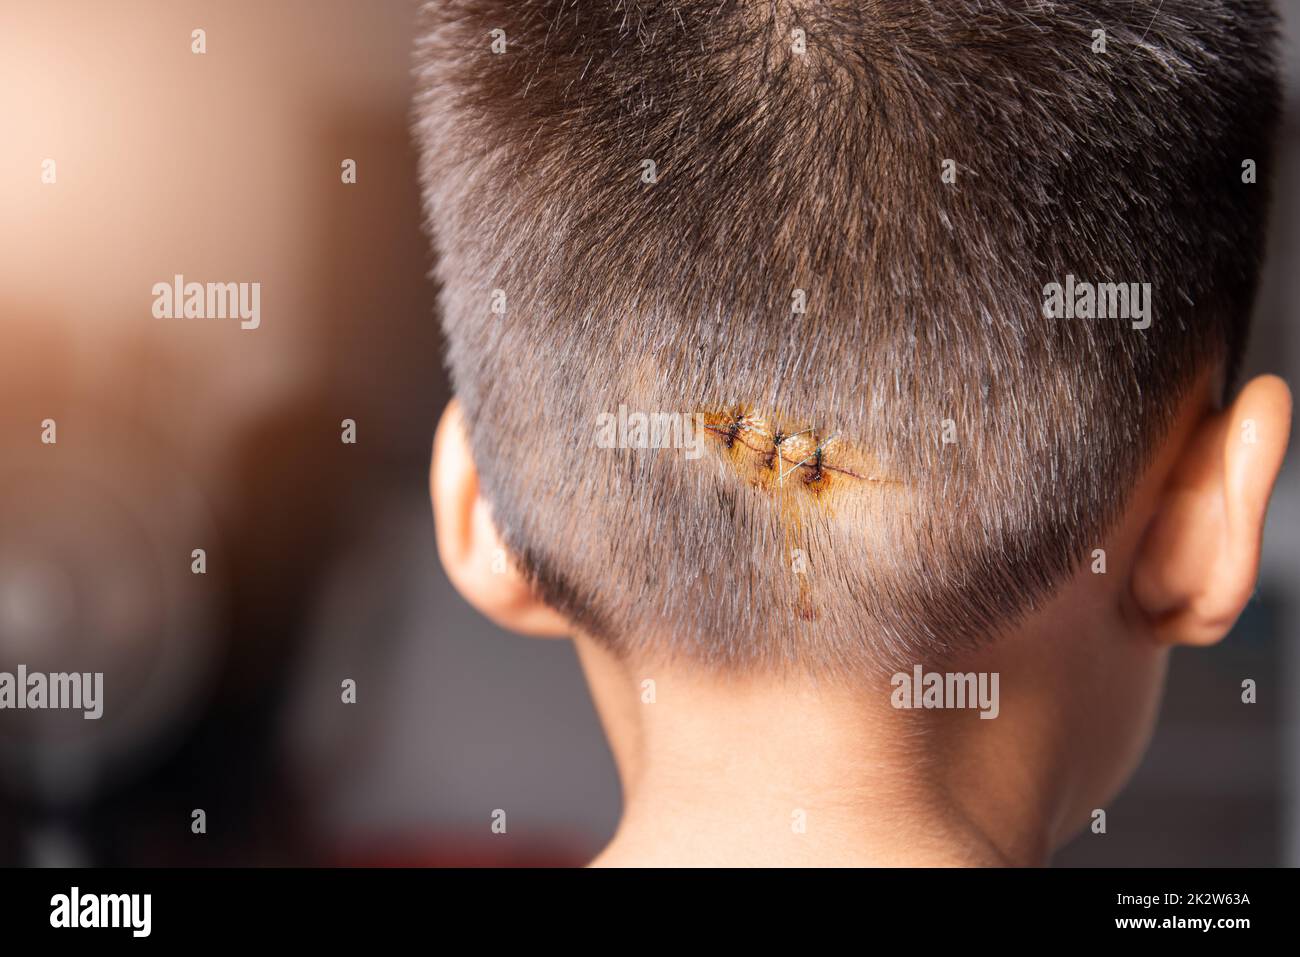 The lacerated suture wound of head which suture by nylion suture about 3 stitches Stock Photo